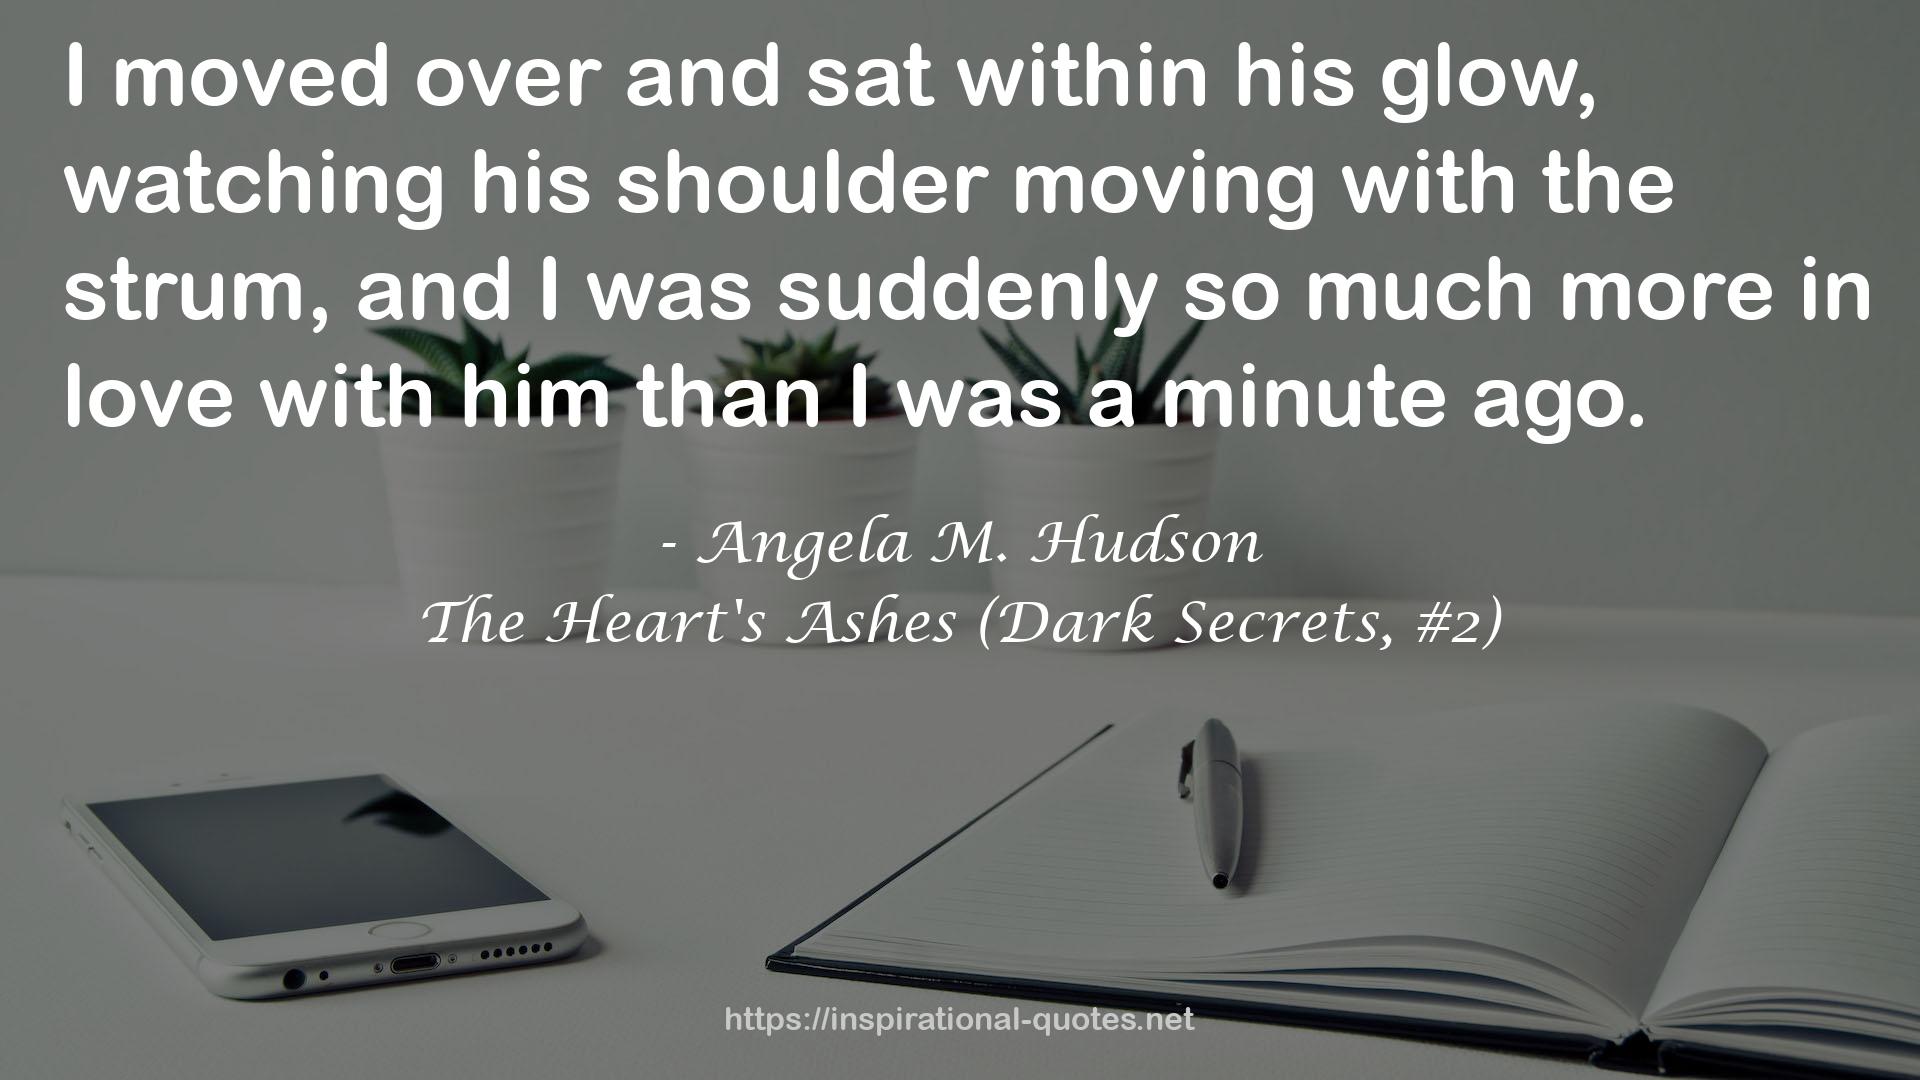 The Heart's Ashes (Dark Secrets, #2) QUOTES